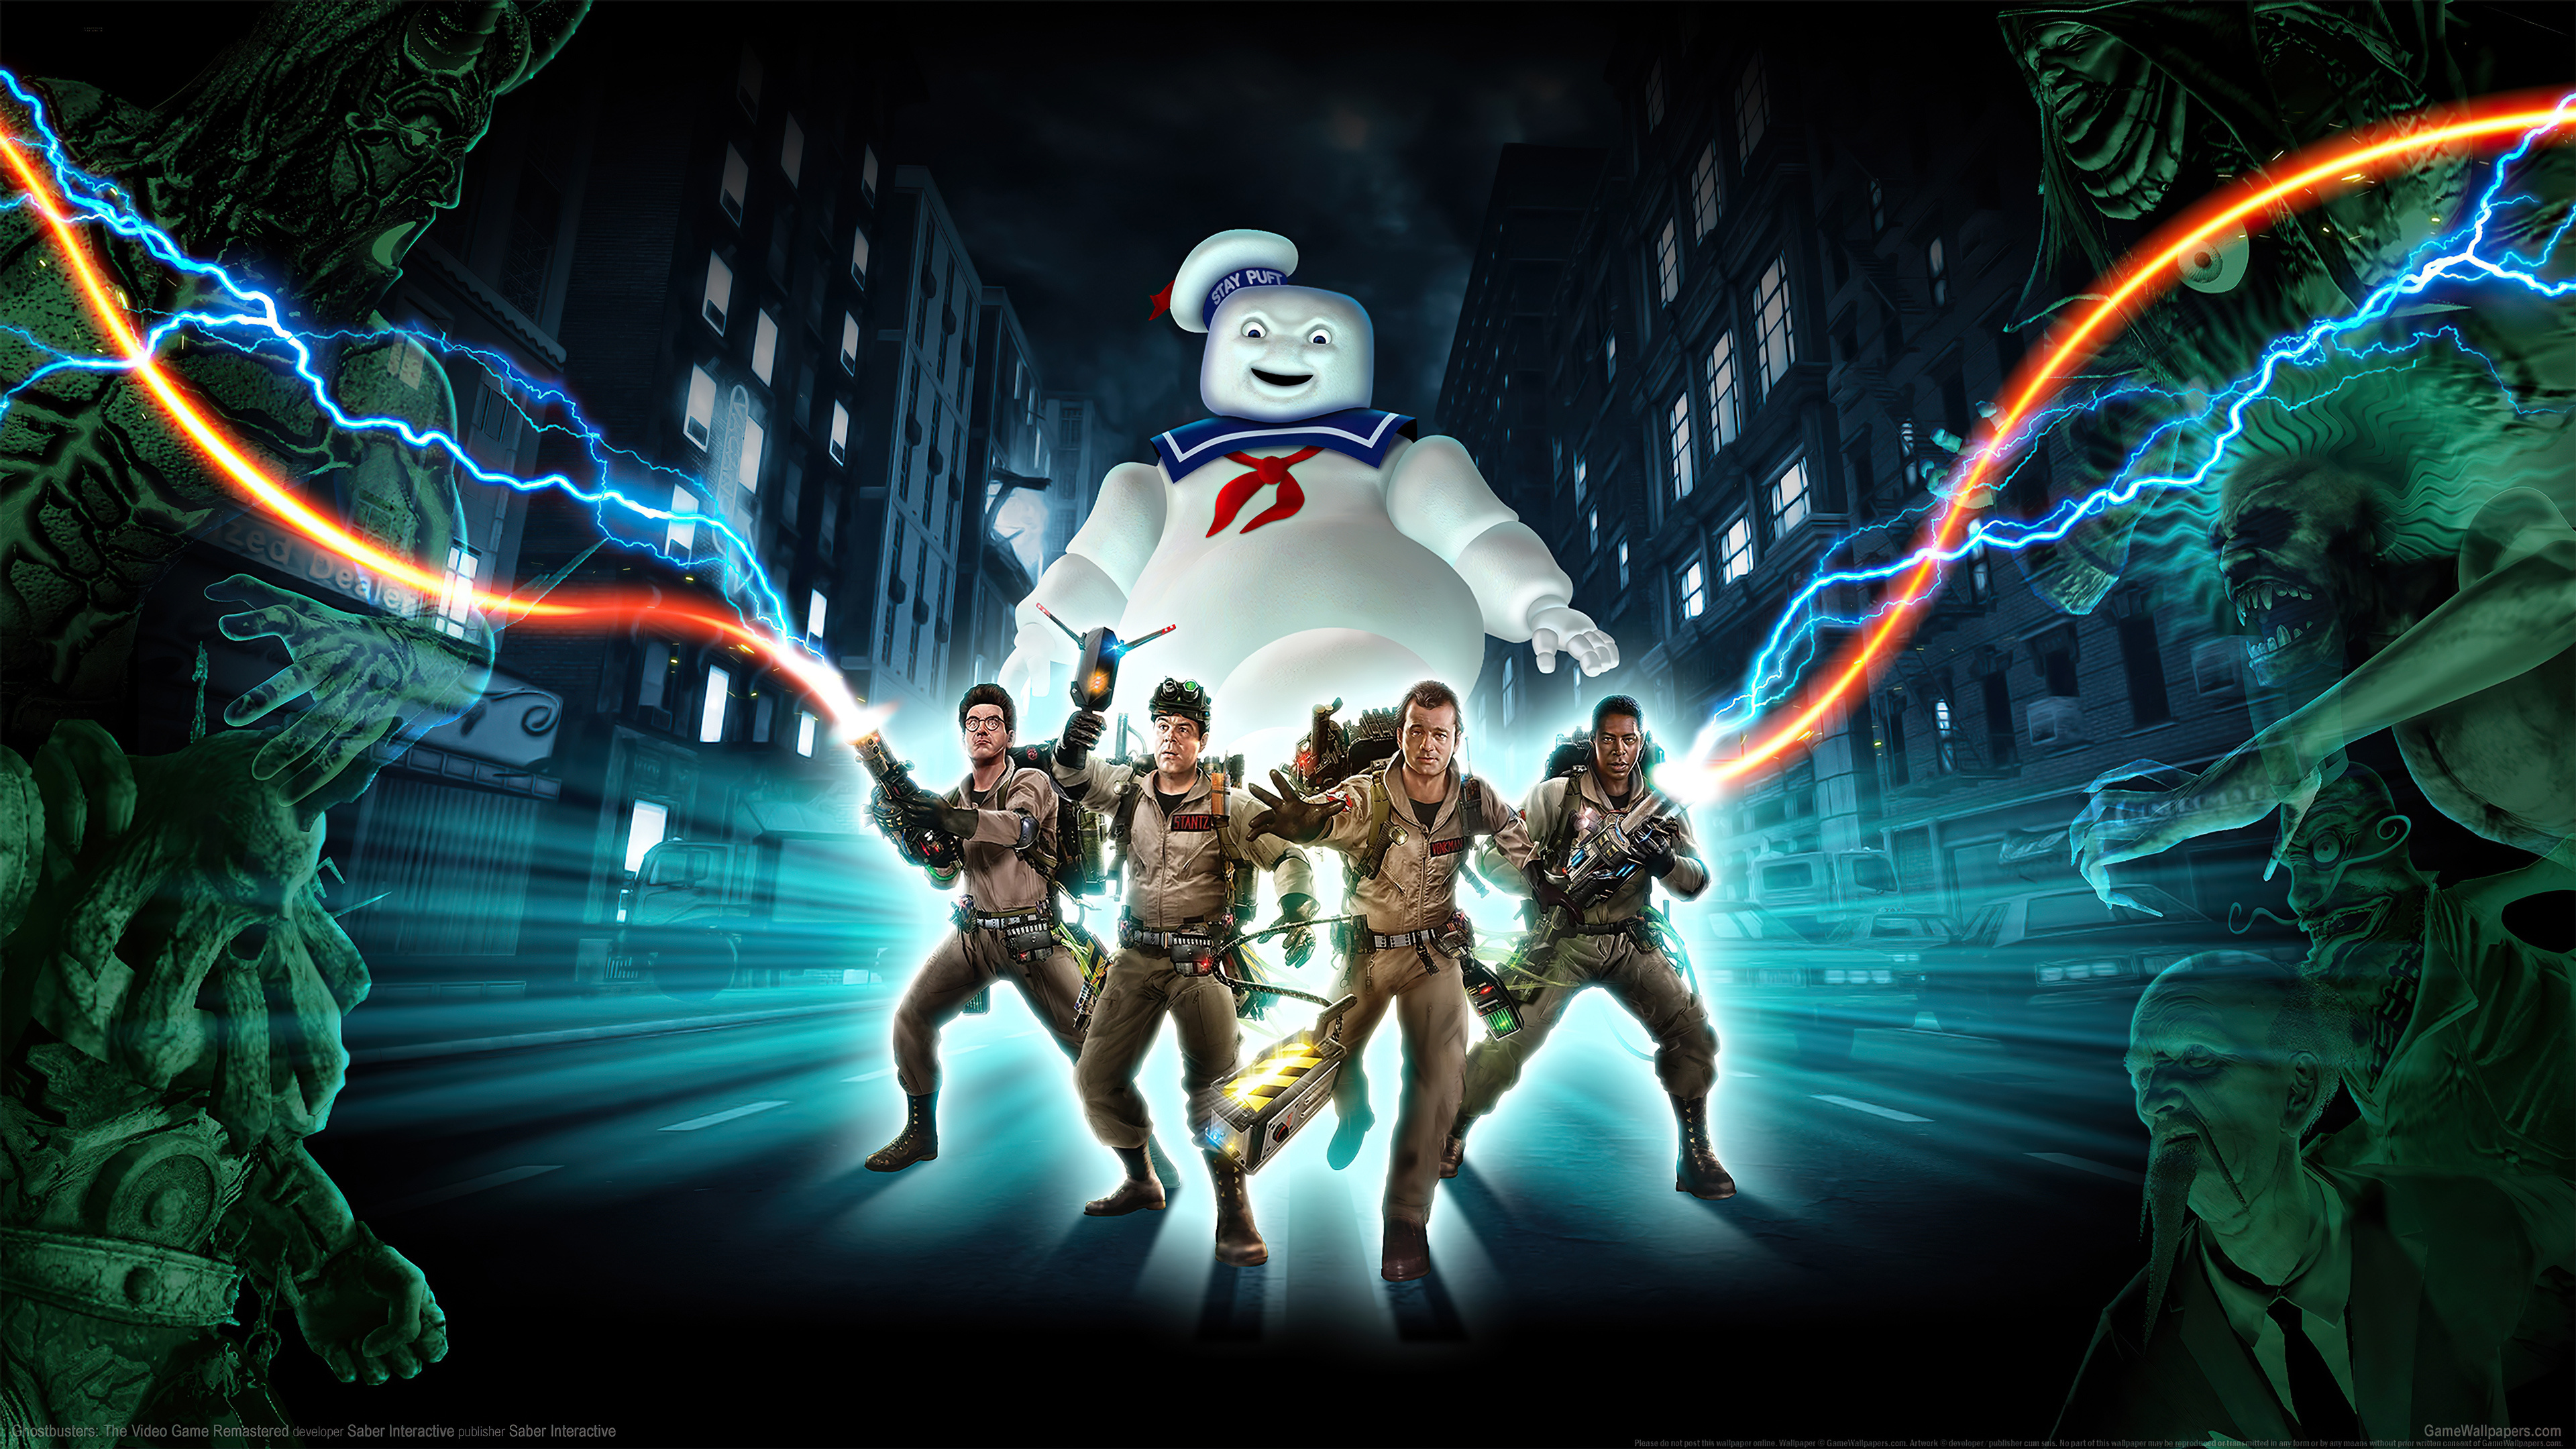 Ghostbusters: Ghostbusters: The Video Game, a 2009 action-adventure game. 3840x2160 4K Wallpaper.